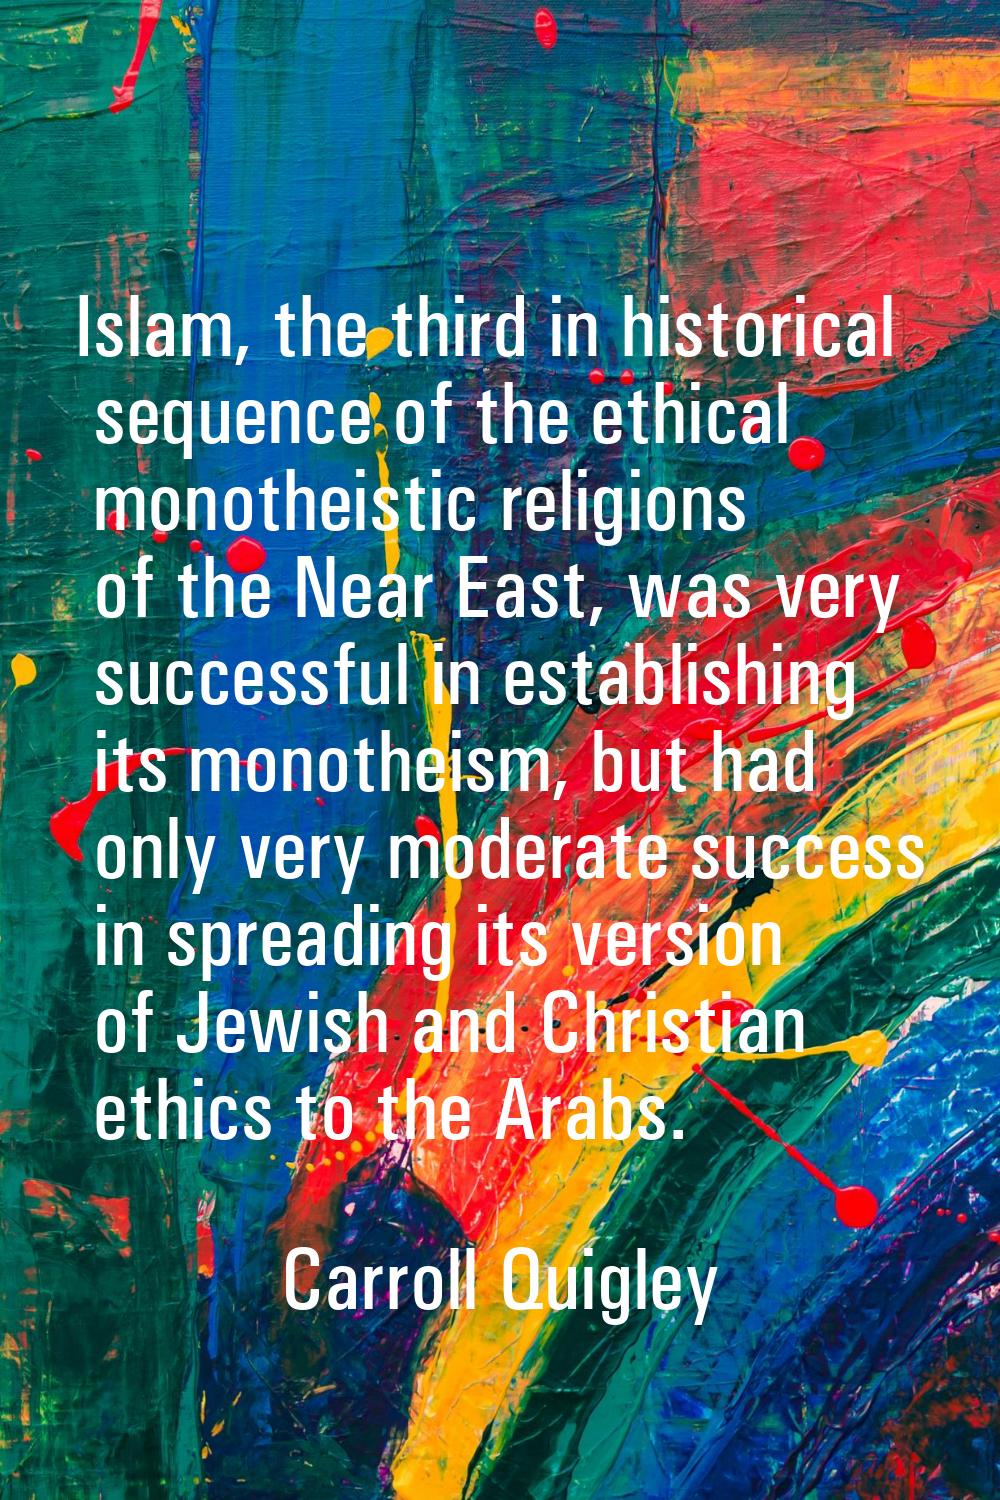 Islam, the third in historical sequence of the ethical monotheistic religions of the Near East, was